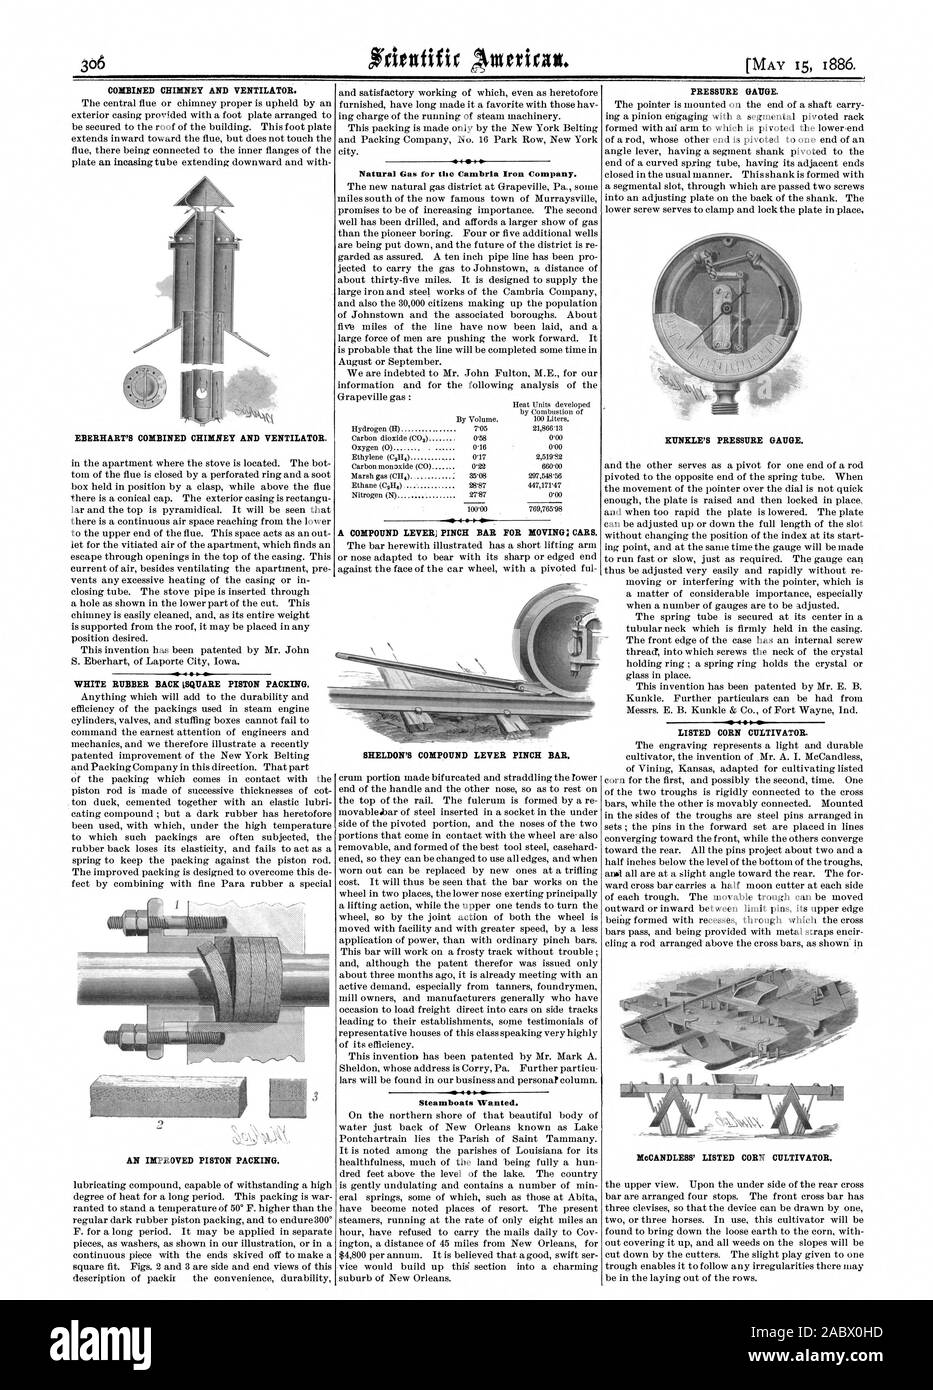 COMBINED CHIMNEY AND VENTILATOR. The central flue or chimney proper is upheld by an exterior casing provided with a foot plate arranged t EBERHART'S COMBINED CHIMNEY AND VENTILATOR. WHITE RUBBER BACK LSQUARE PISTON PACKING. AN IMPROVED PISTON PACKING. Natural Gas for the Cambria Iron Company. A COMPOUND LEVERJ PINCH BAR FOR MOVING :1 CARS. PRESSURE GAUGE. KUNKLE'S PRESSURE GAUGE. thread into which screws the neck of the crystal LISTED CORN CULTIVATOR. DIeCANDLESS' LISTED CORN CULTIVATOR. SHELDON'S COMPOUND LEVER PINCH BAR., scientific american, 1886-05-15 Stock Photo